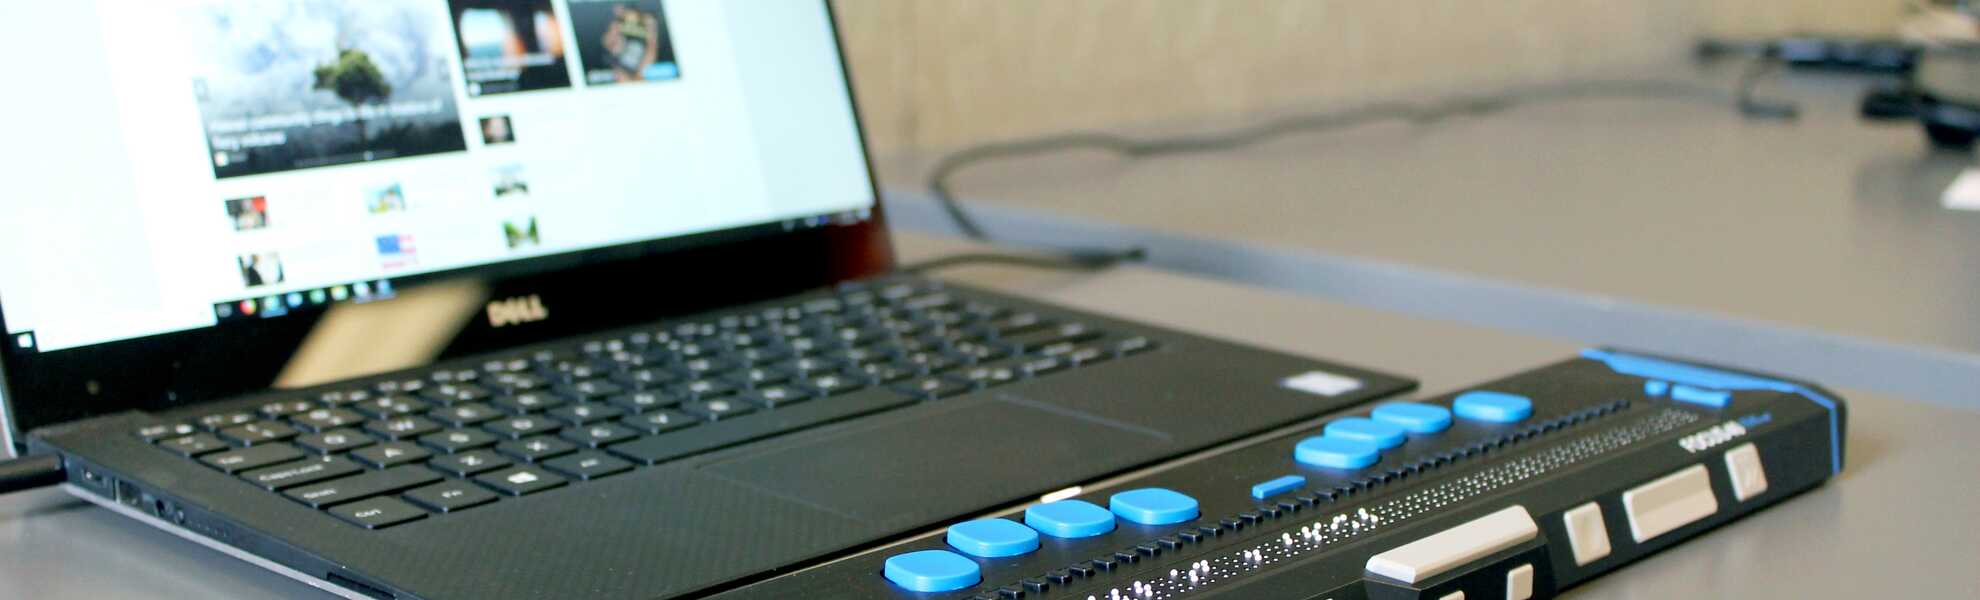 Laptop with braille module attached